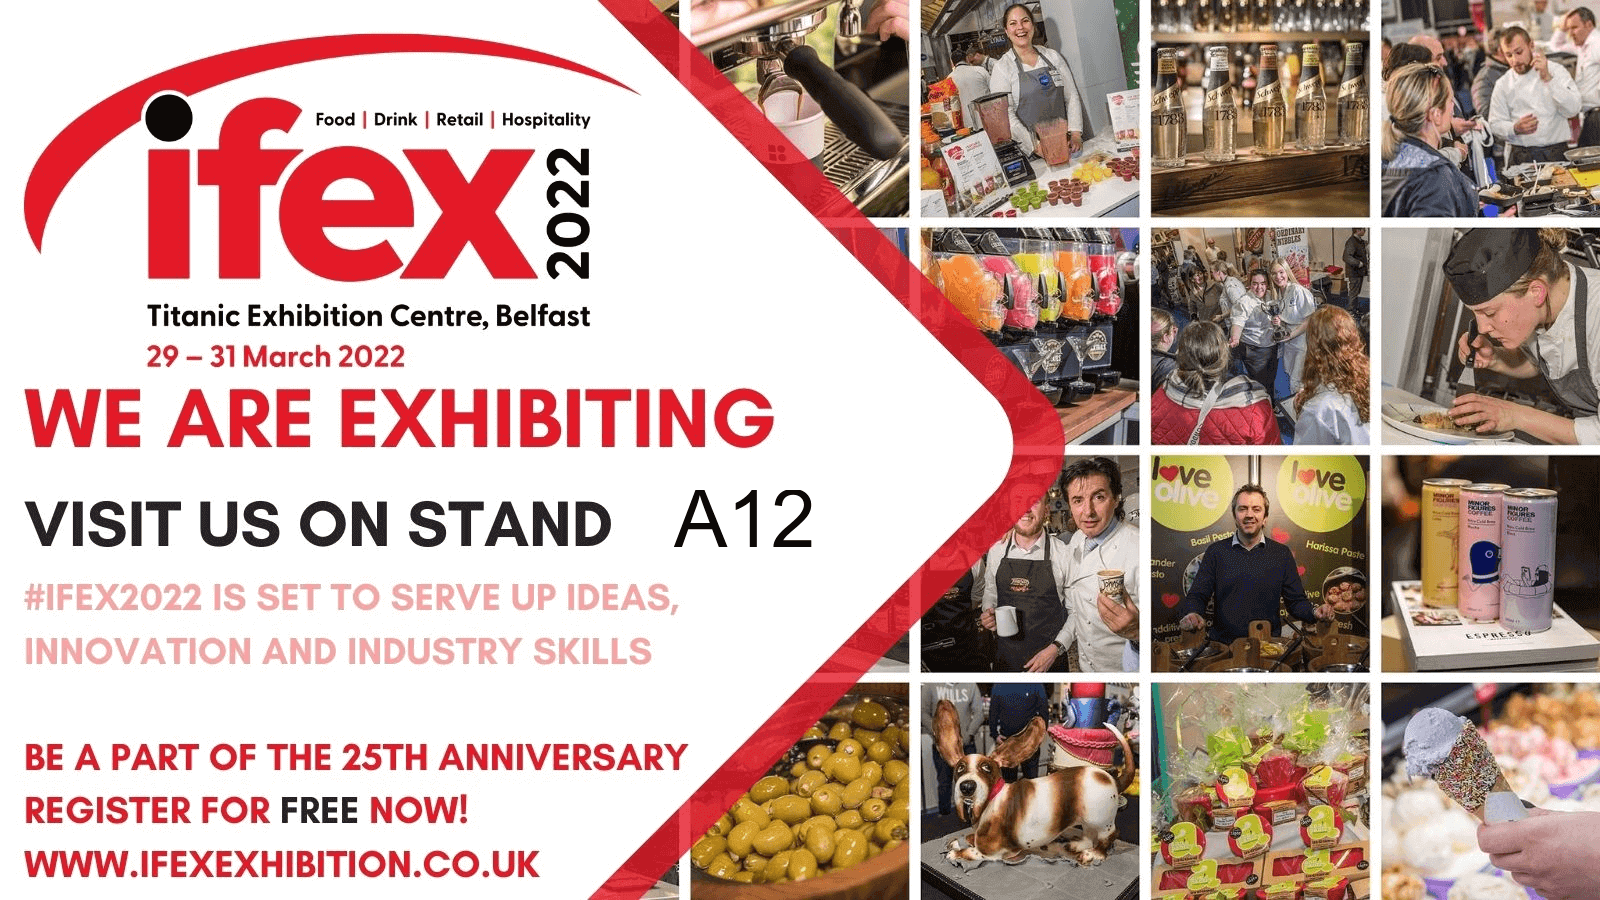 almotech at ifex 2022